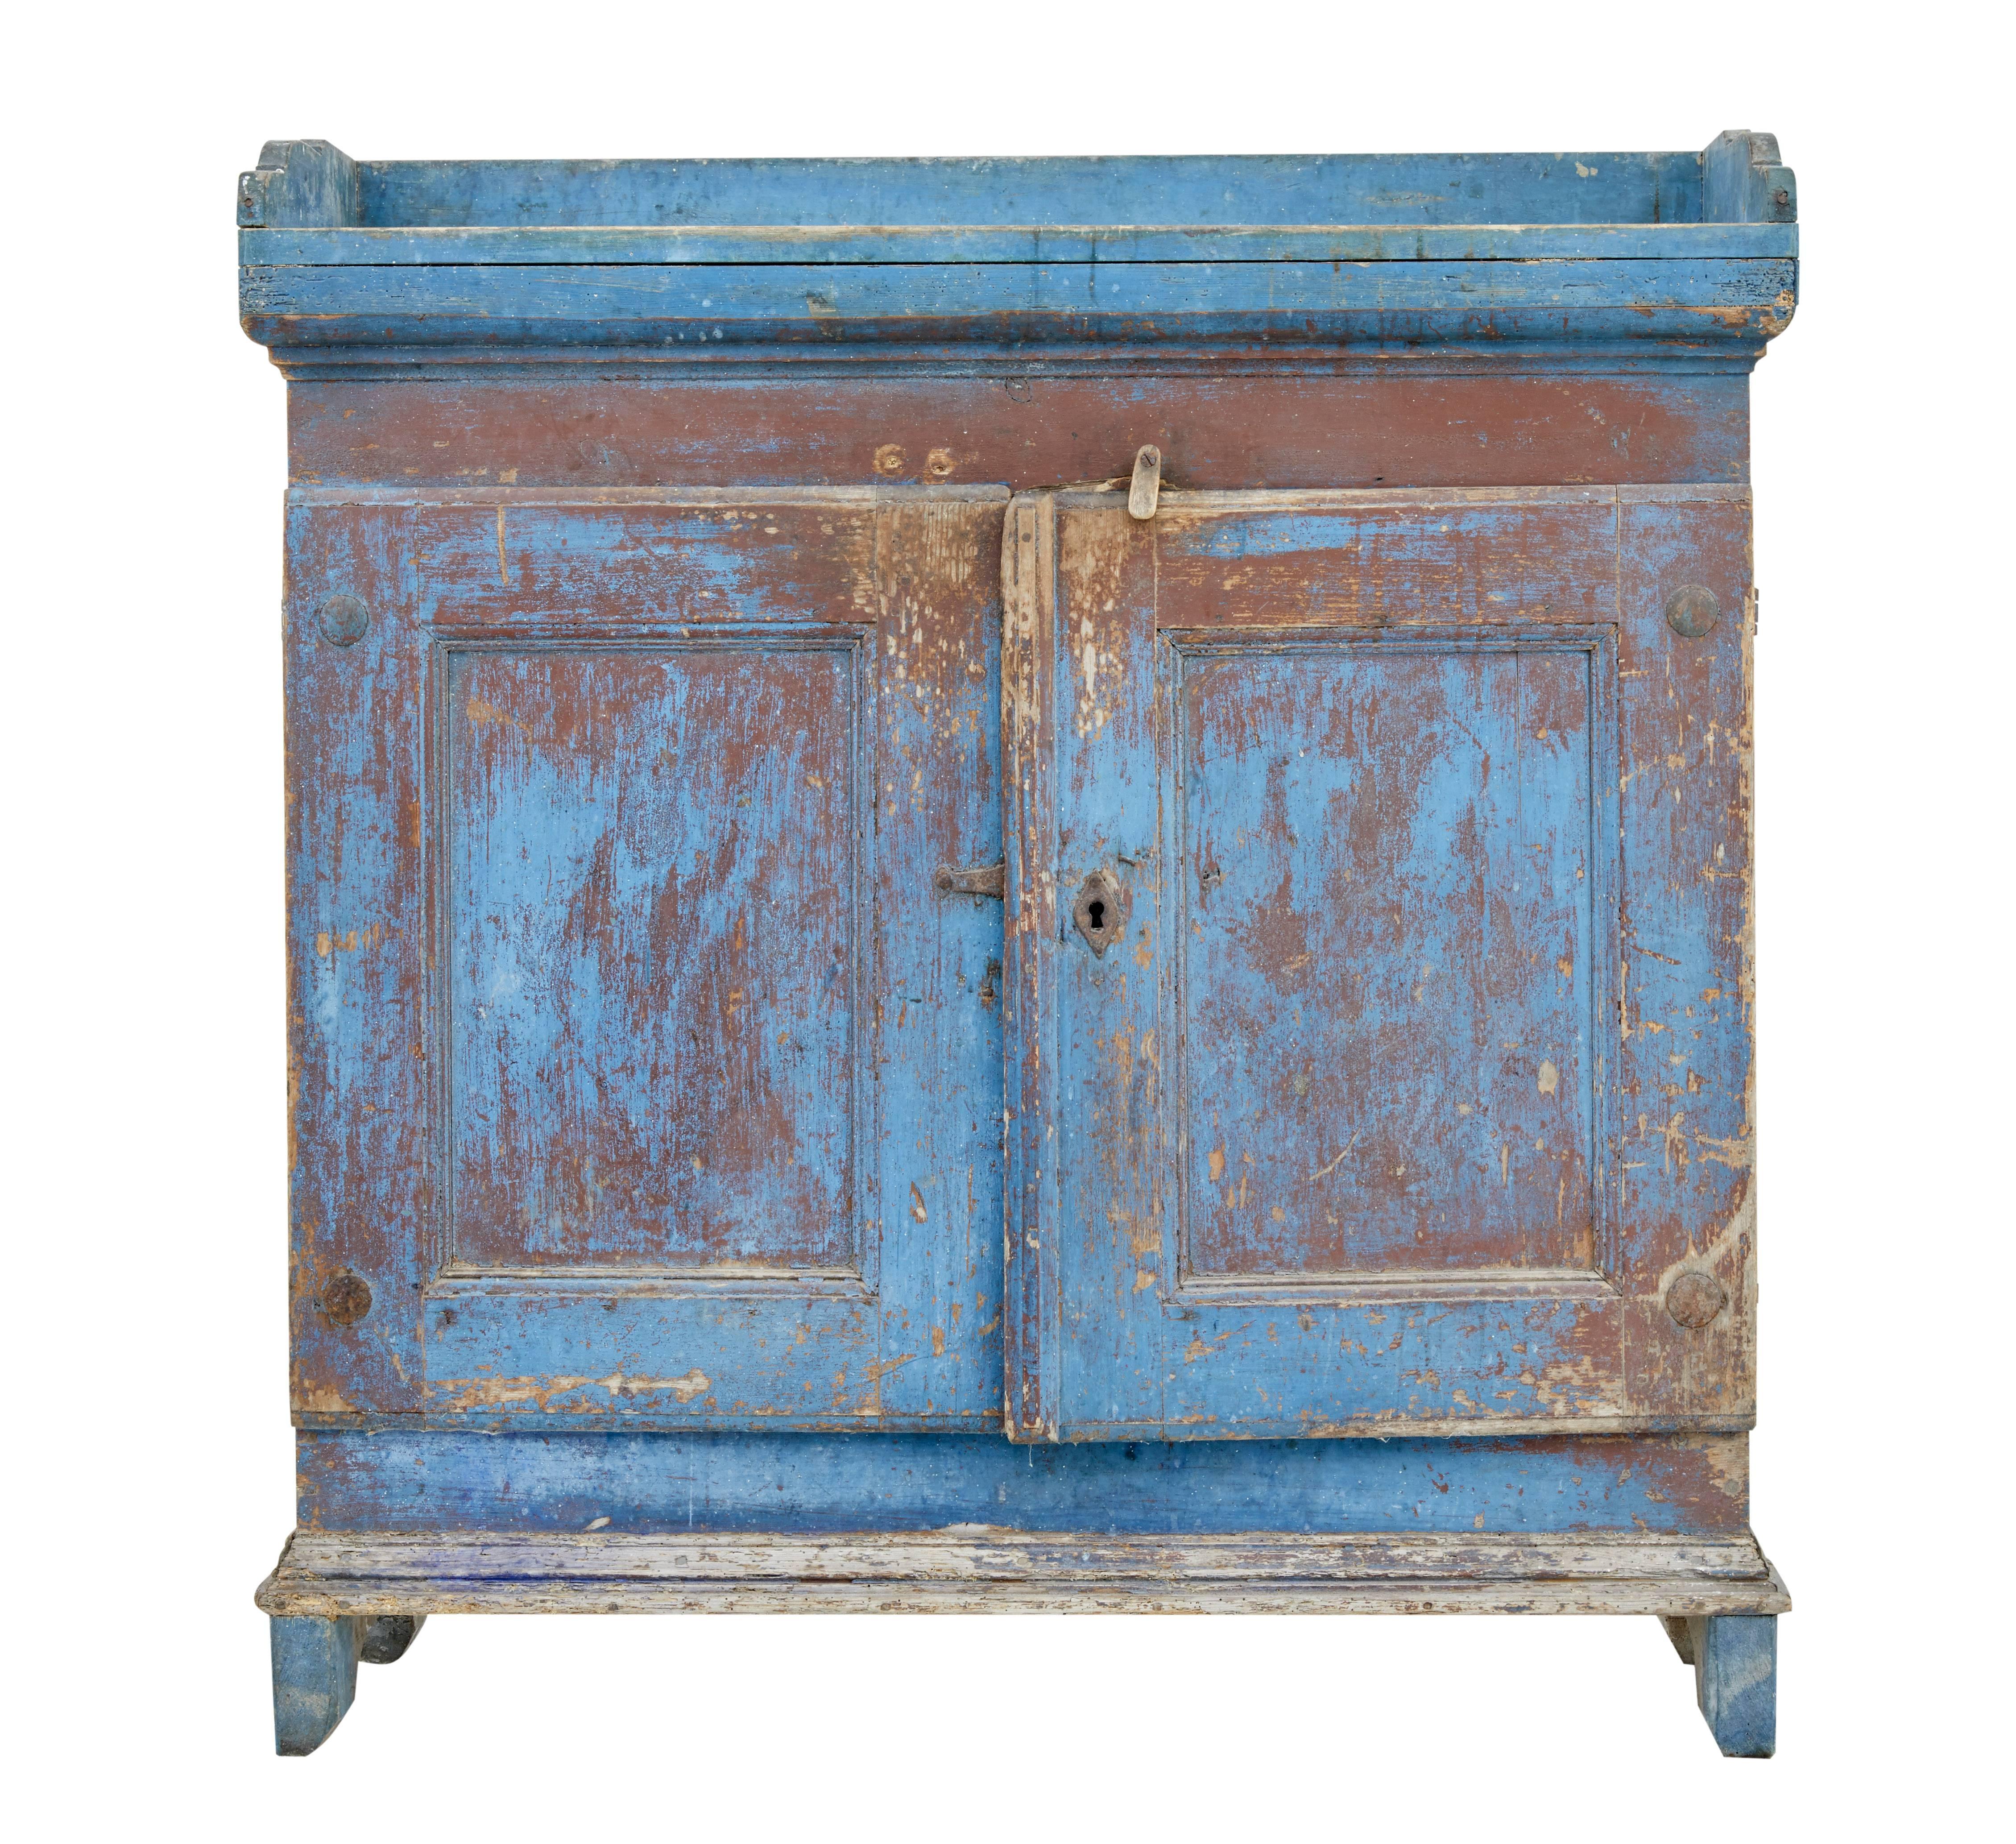 Here we offer a rustic Swedish painted cupboard, circa 1800.
In original rustic condition with the various of layers of paint wearing through the plain pine.
Top surface with gallery, double doors open to reveal three shelves and original